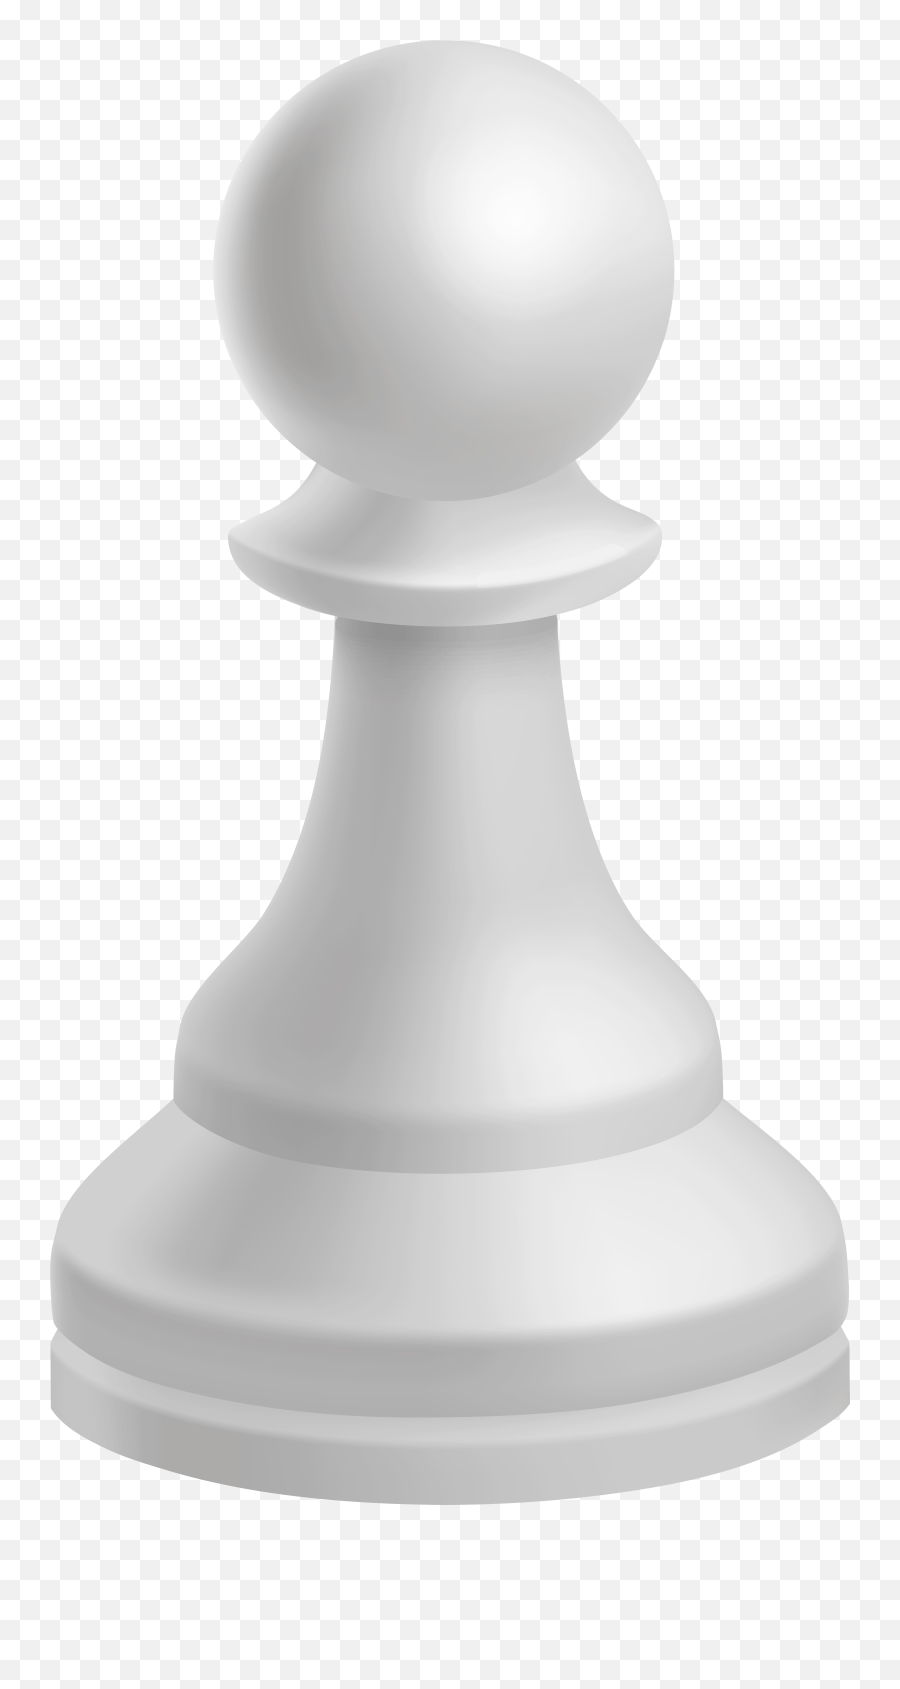 Library Of Buildings That Are Chess Pieces Graphic Free - Chess Pawn Png Emoji,Board Games Clipart